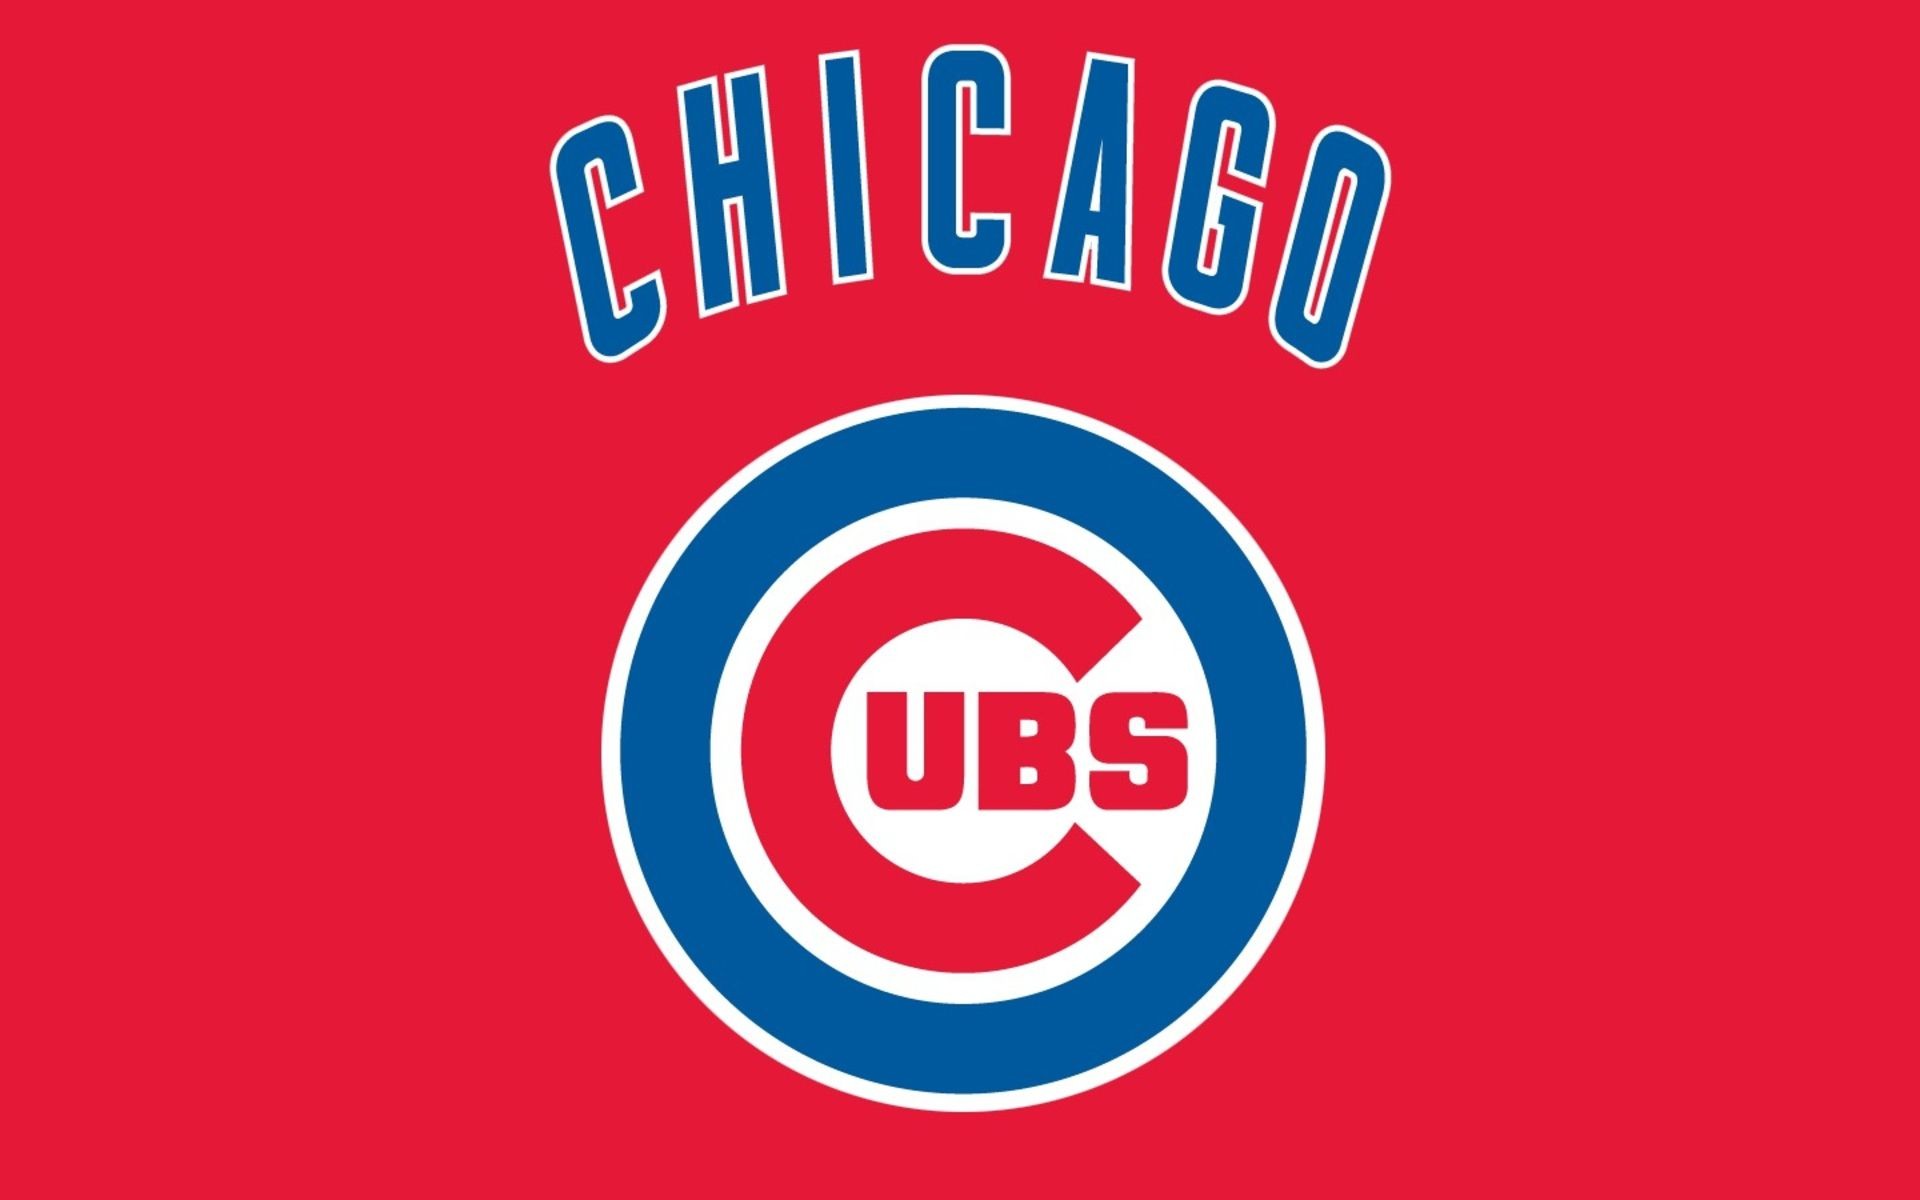 1920x1200 Chicago Cubs Wallpapers Desktop Backgrounds - Wallpapers More